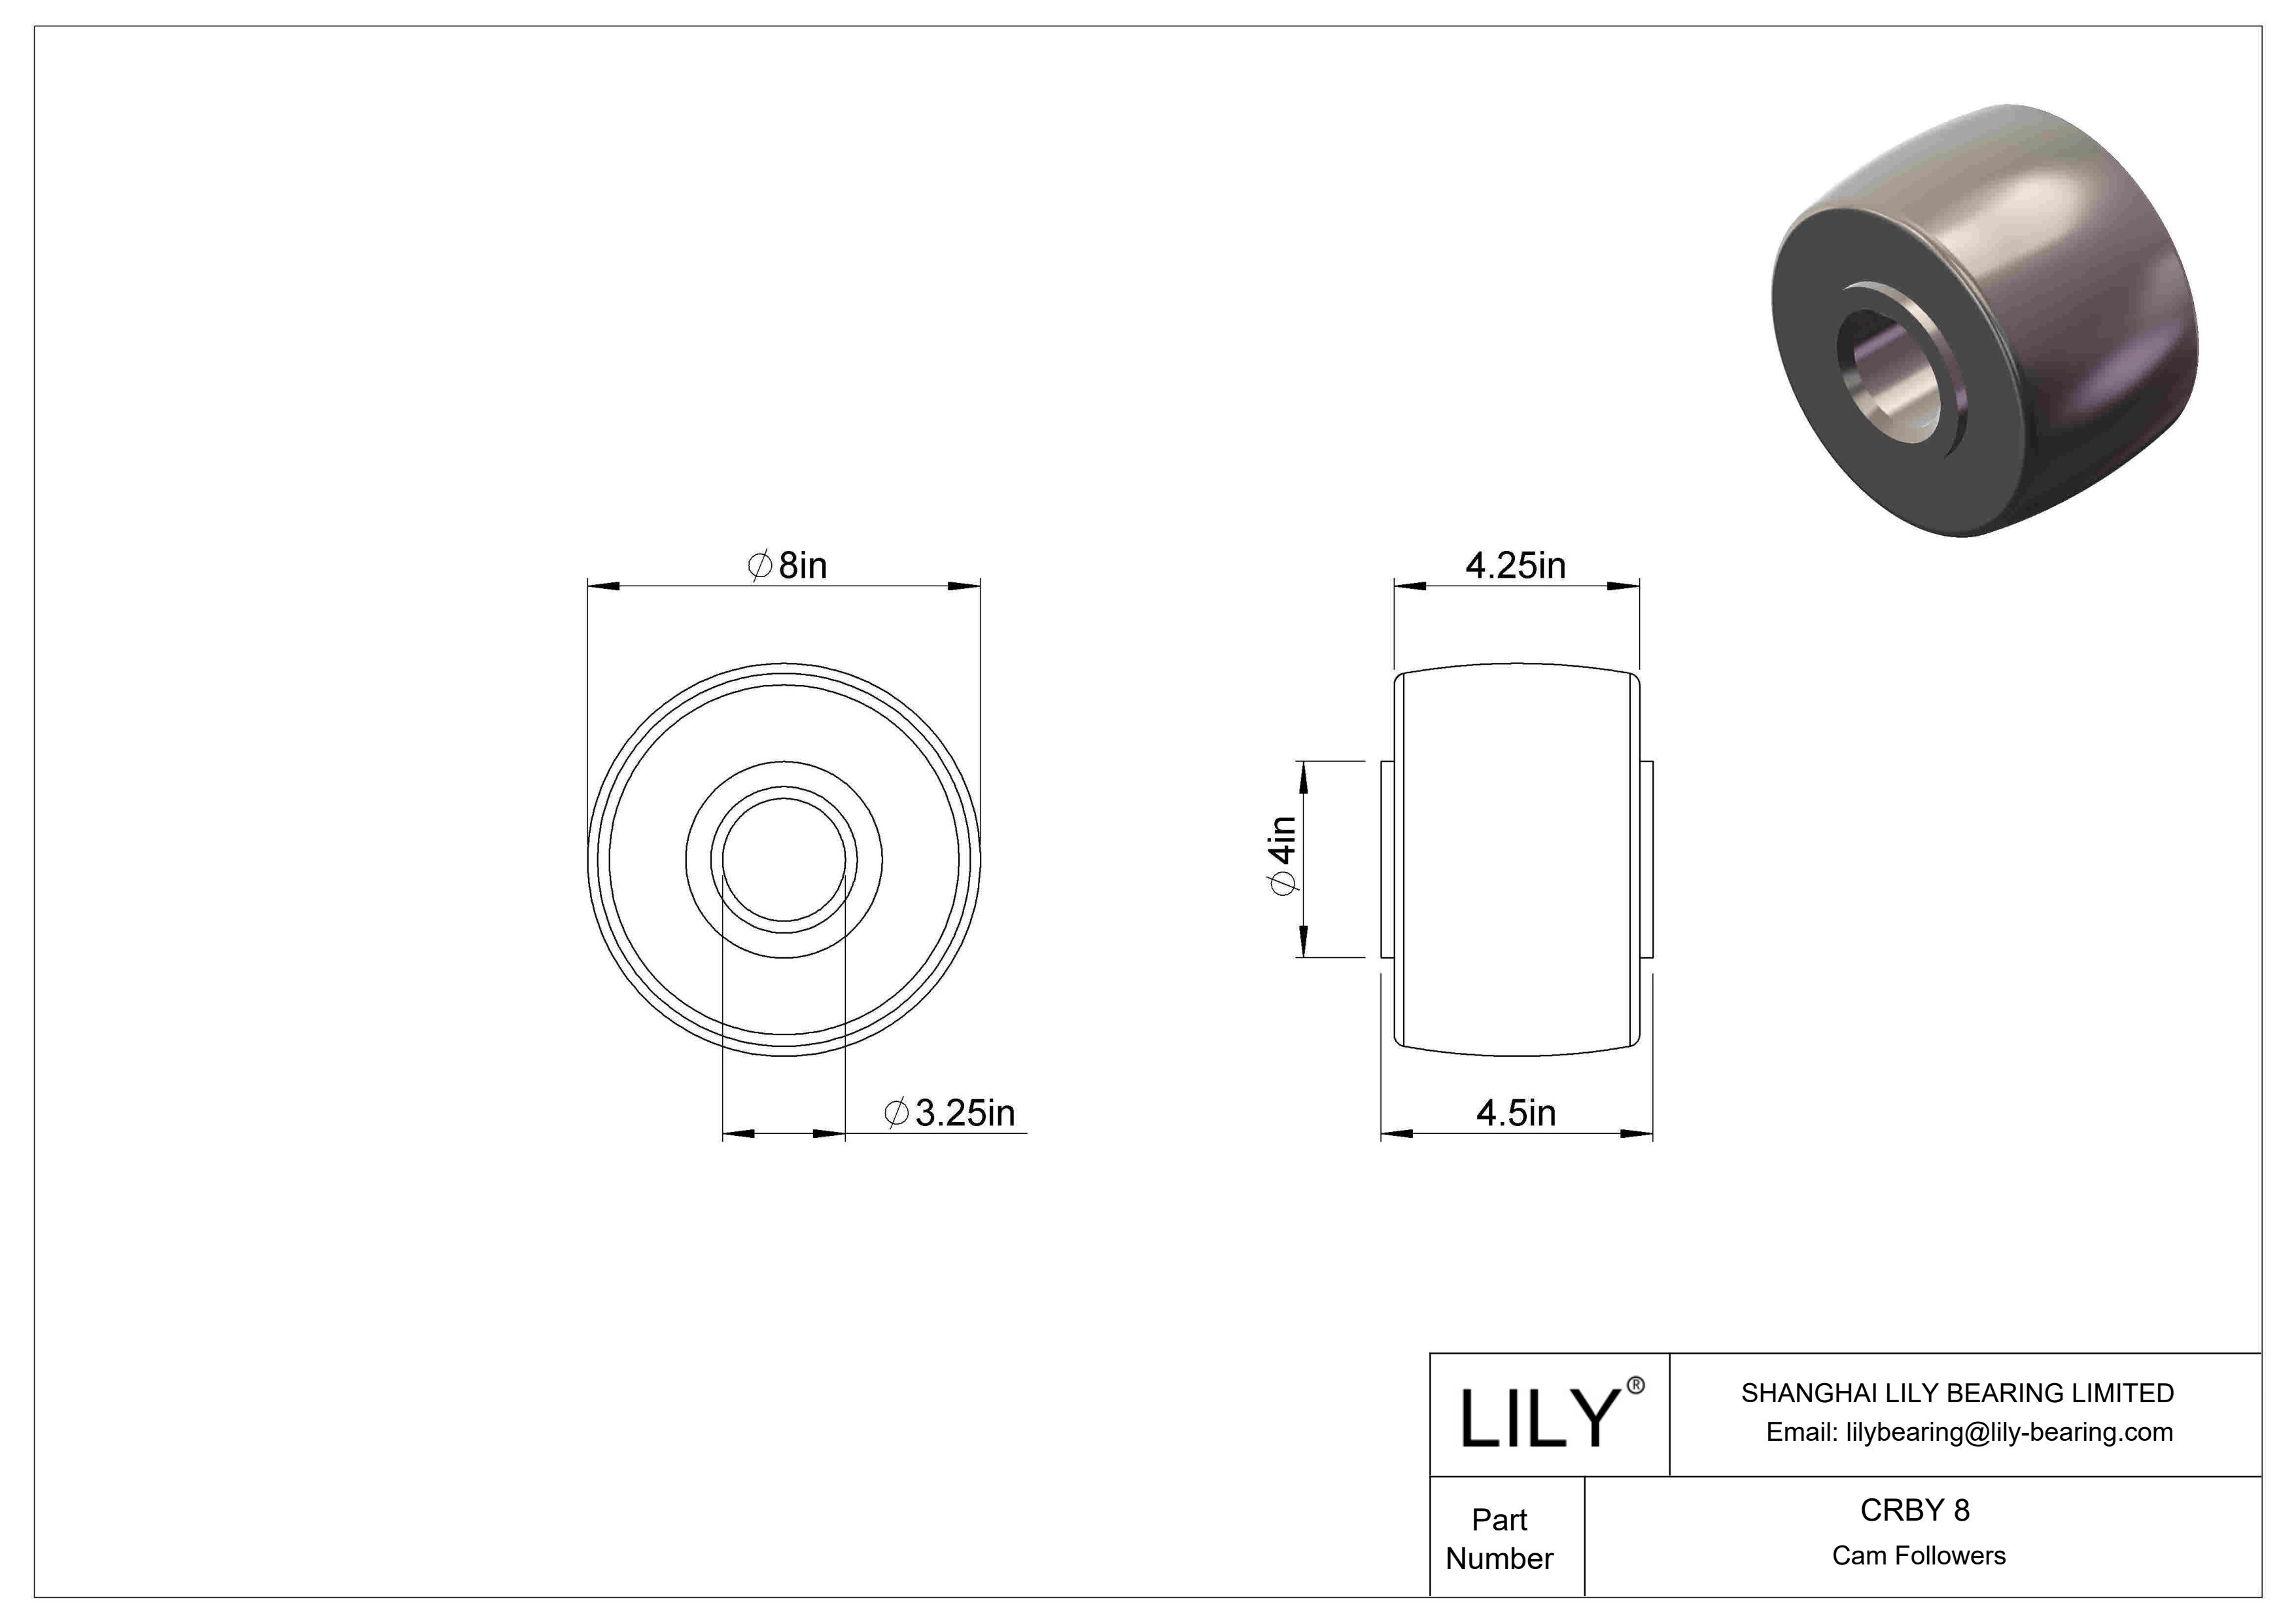 CRBY 8 Roller Cam Follower-Yoke Type cad drawing